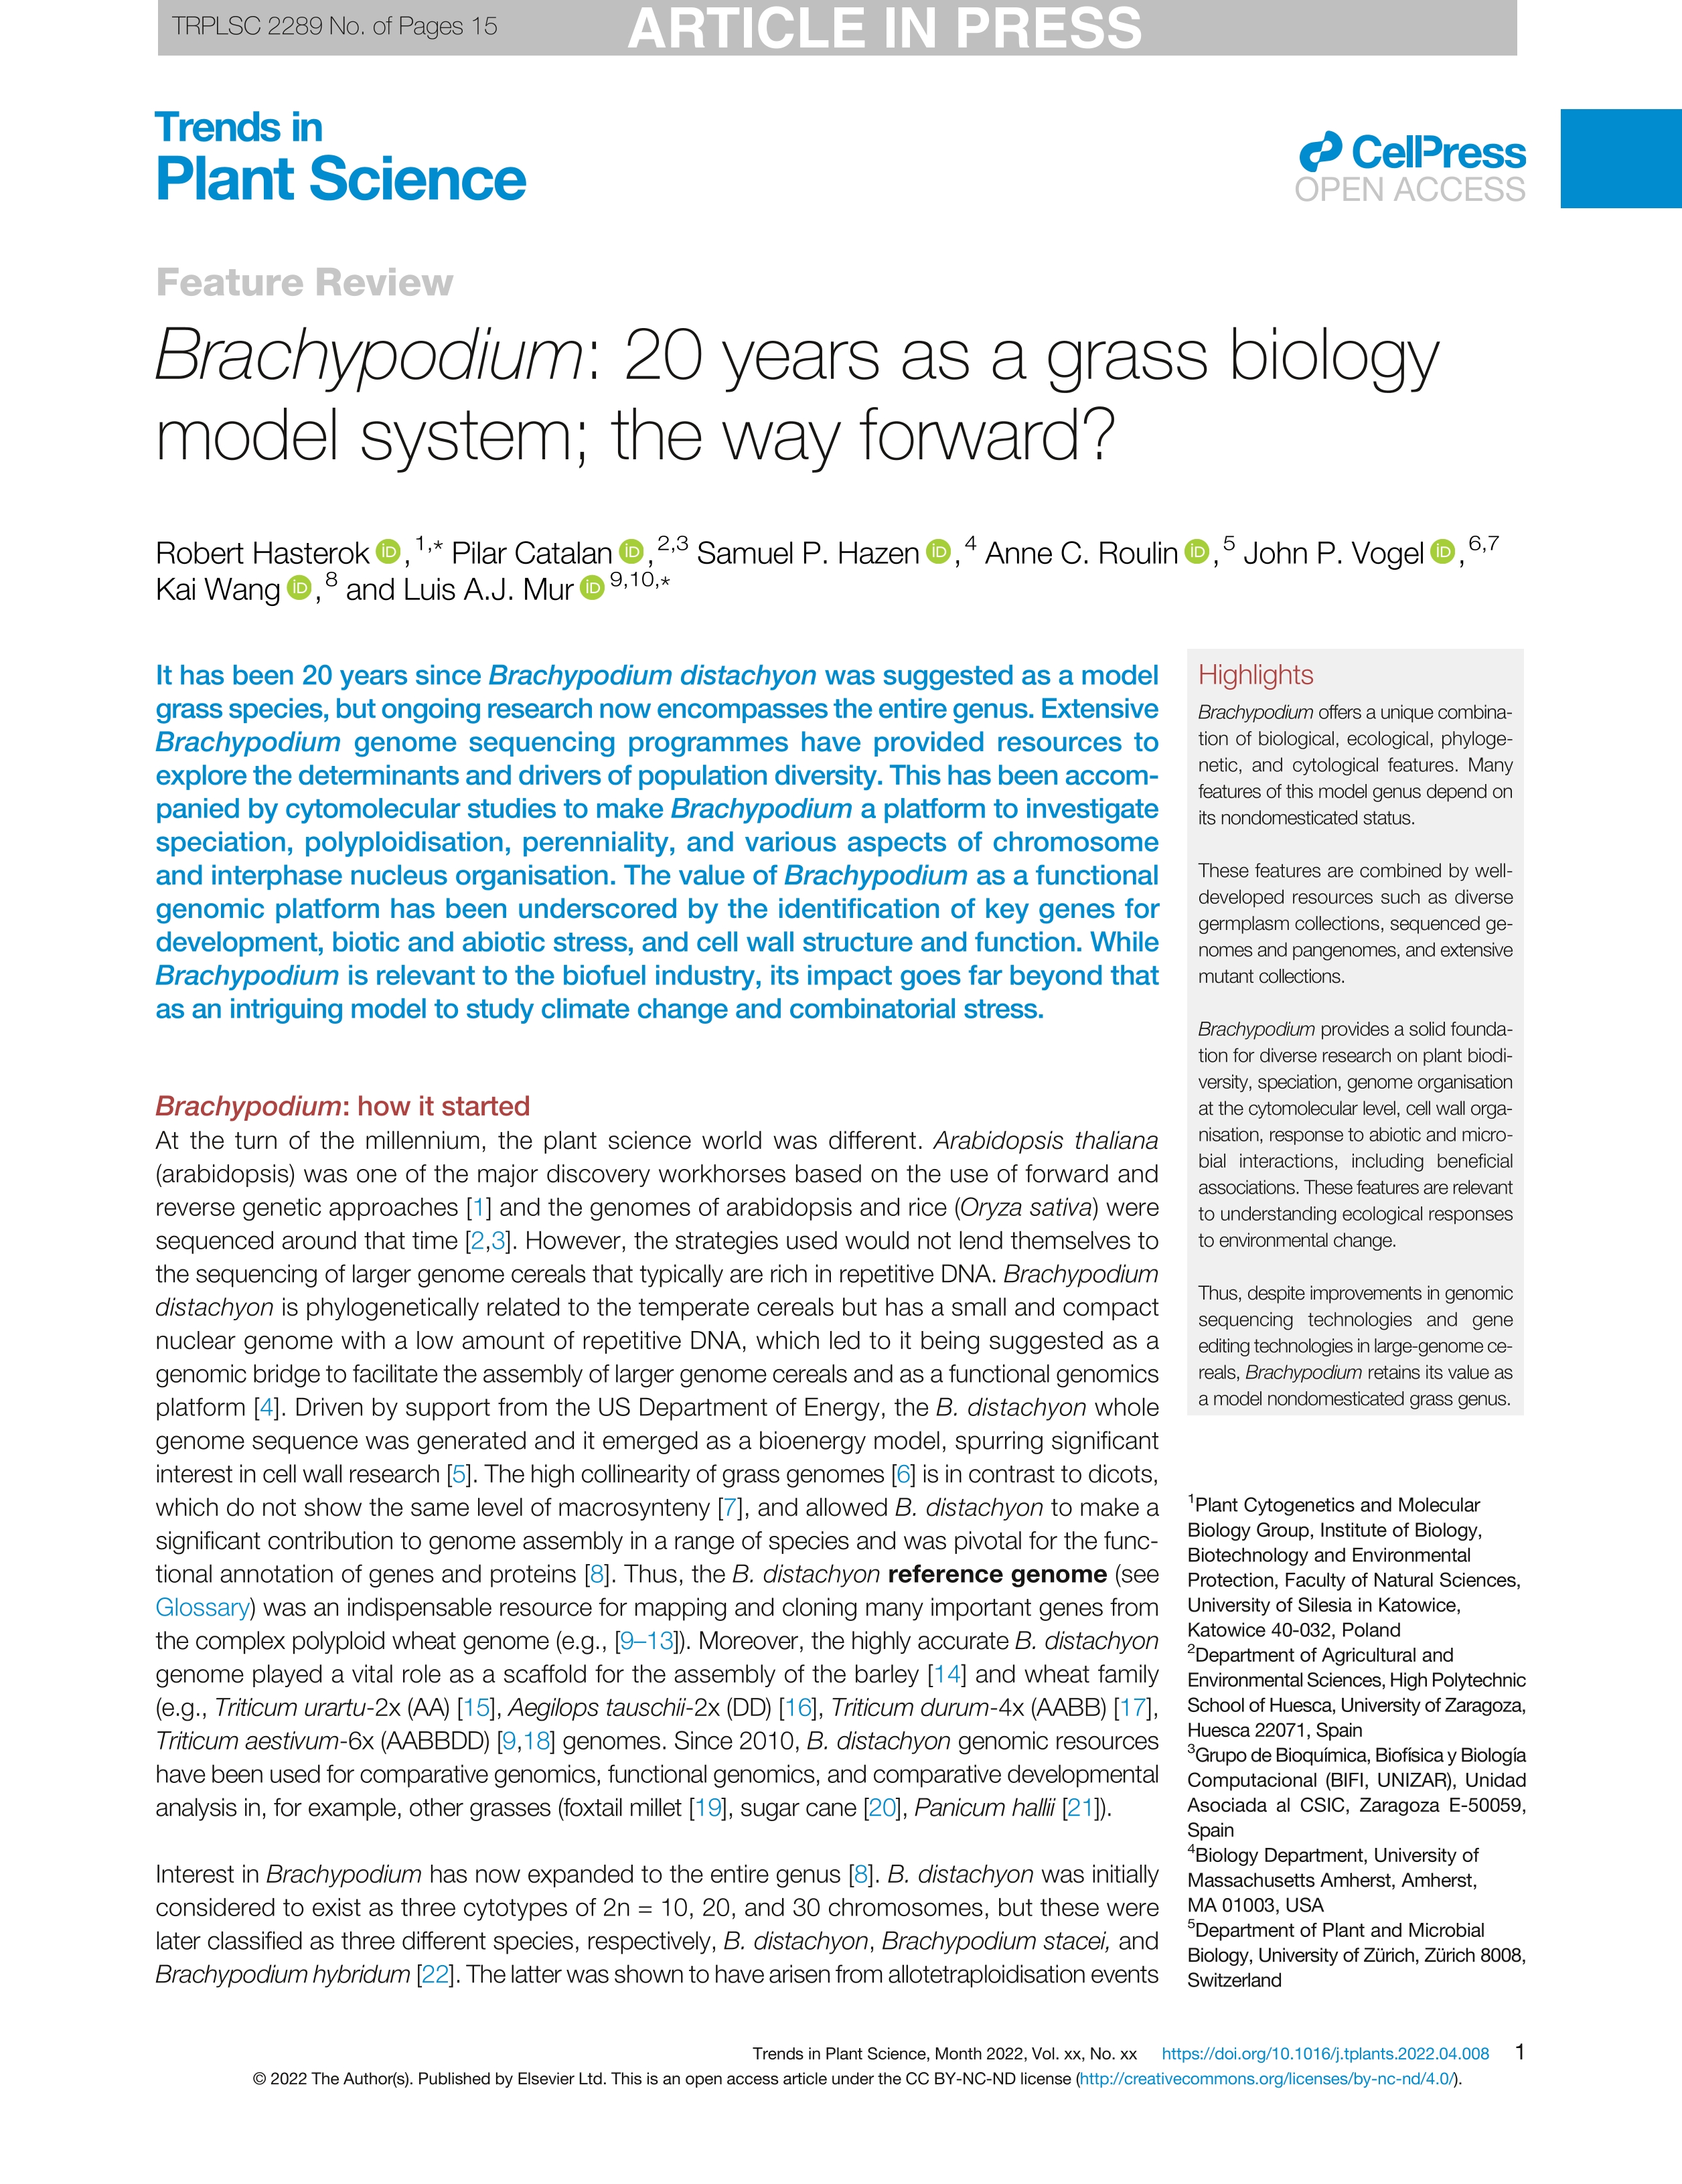 Brachypodium: 20 years as a grass biology model system; the way forward?